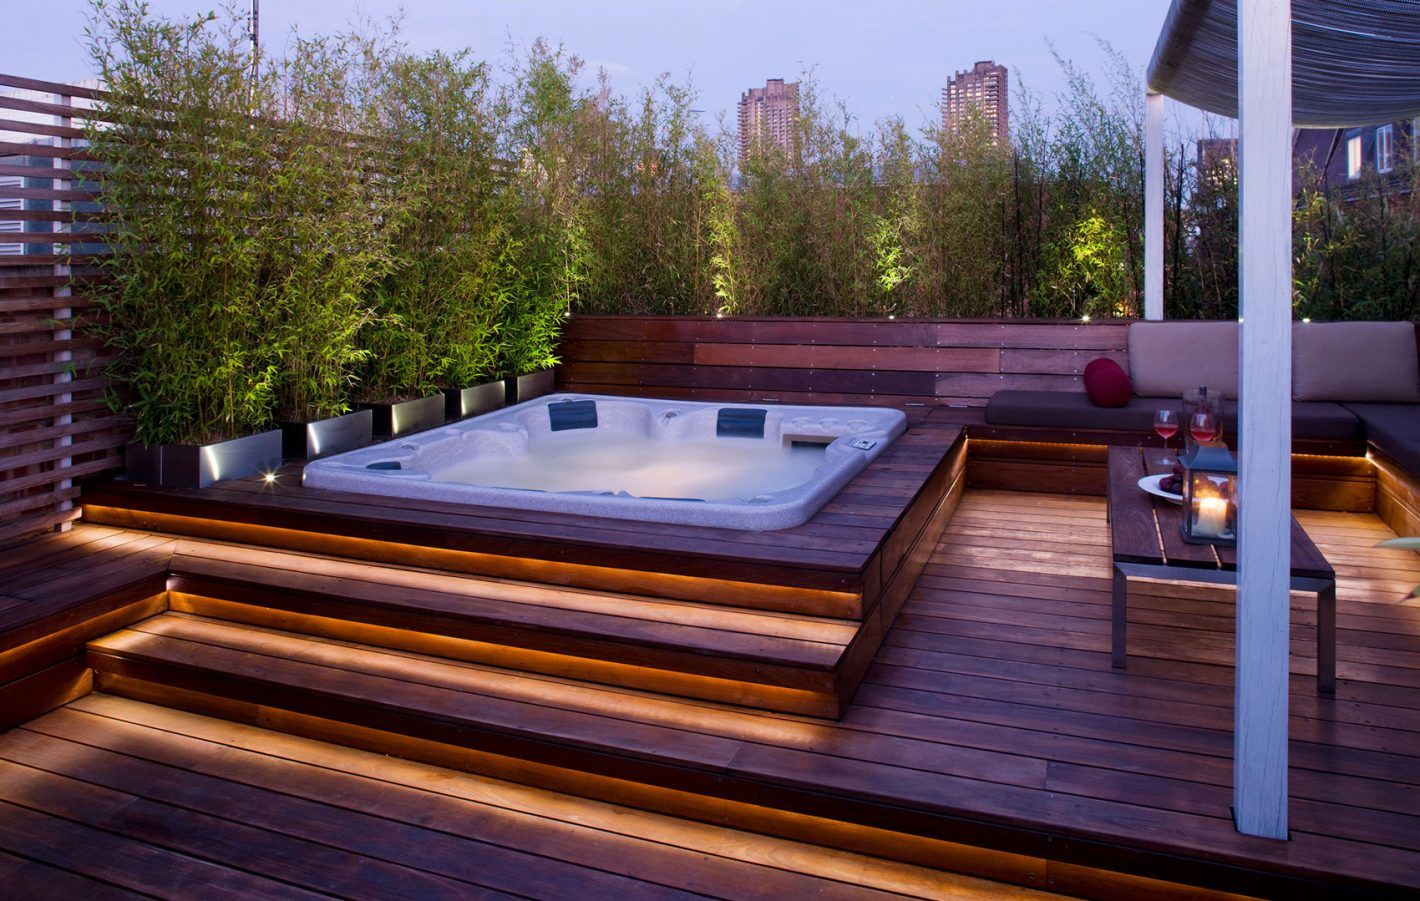 12 Deck Lighting Ideas In 2019 Outdoor Jacuzzi Outdoor Hot Tub pertaining to size 1420 X 901